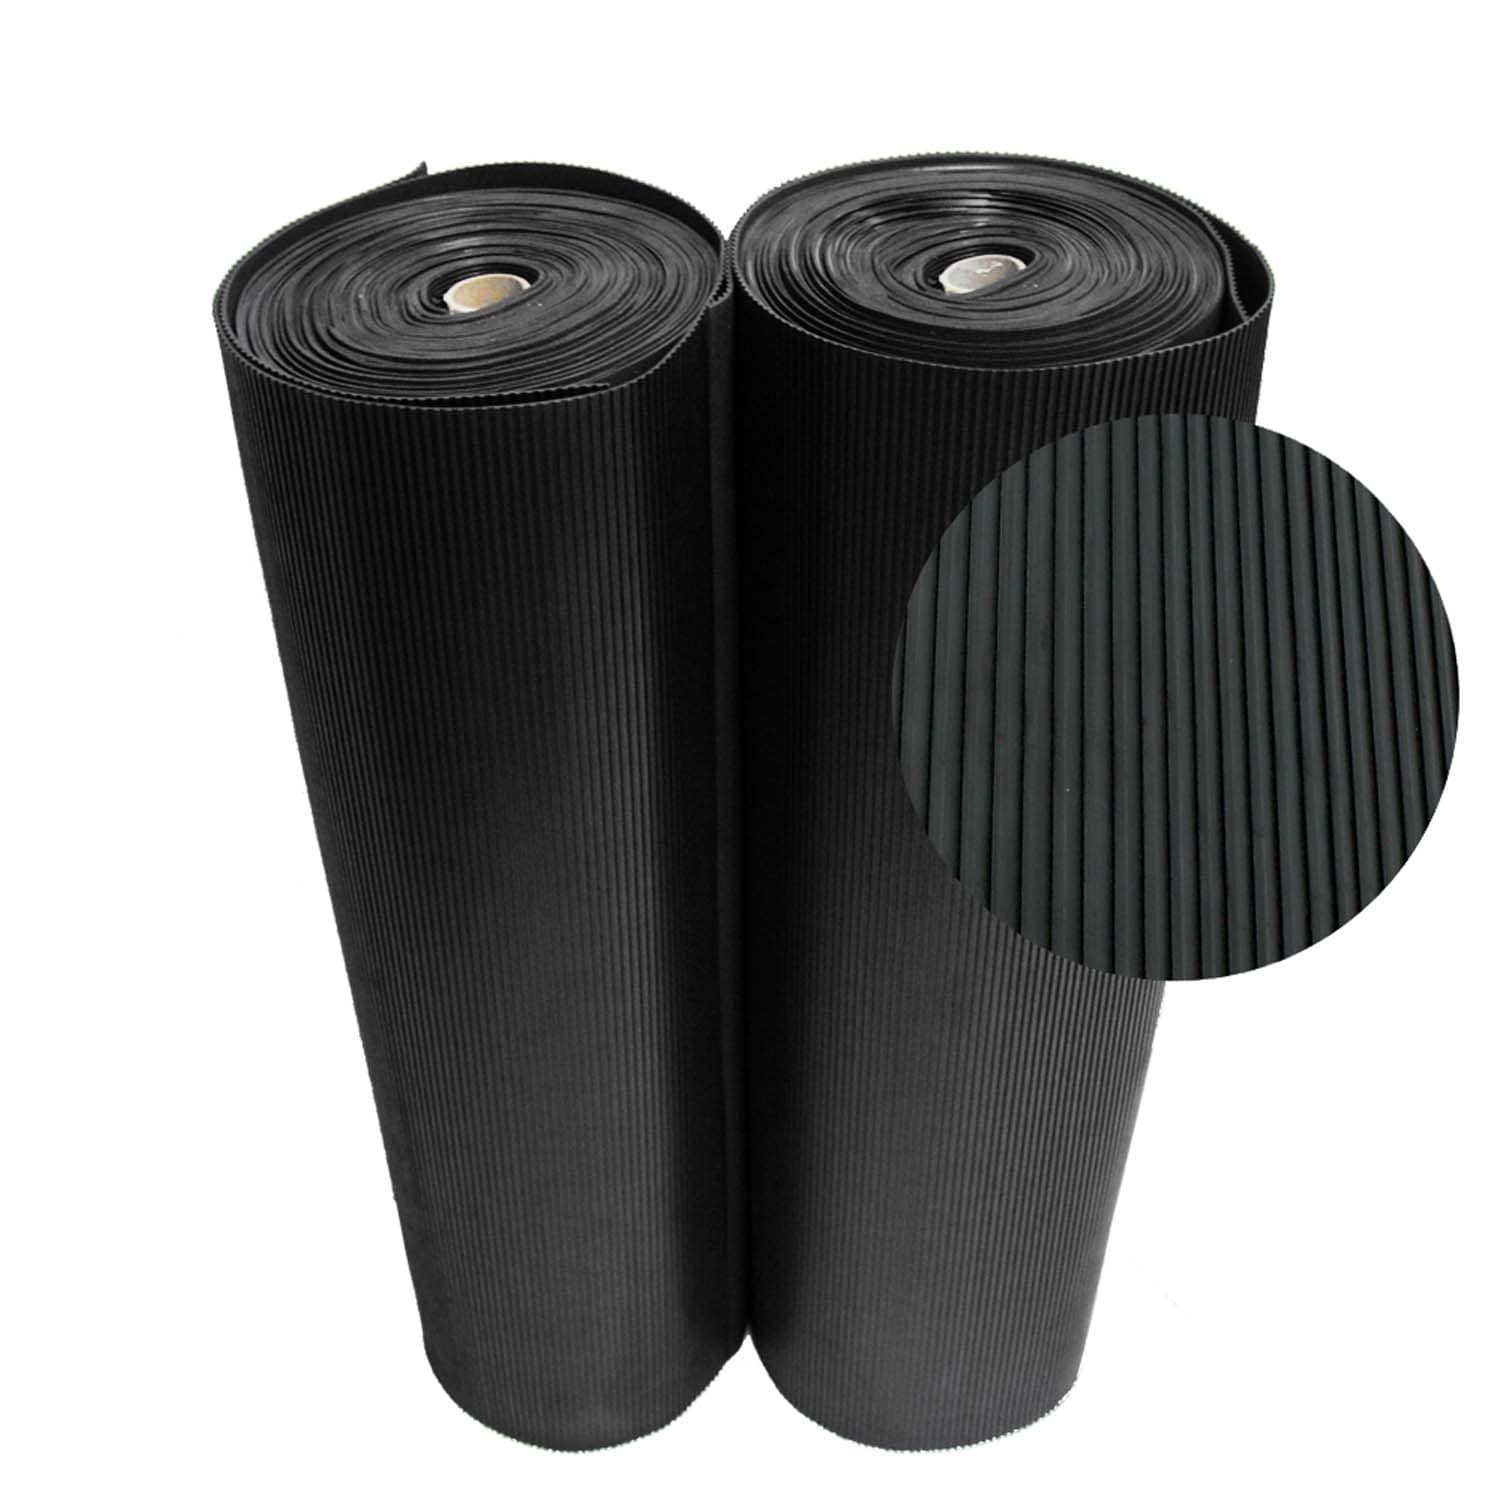 Silicone Rubber Sheet Roll 40x118x 1/8 (0.125) Flexible Rubber Flooring  Roll Mat for Workshop Garage Gym Anti- Vibration Anti-Slip Heat Protection